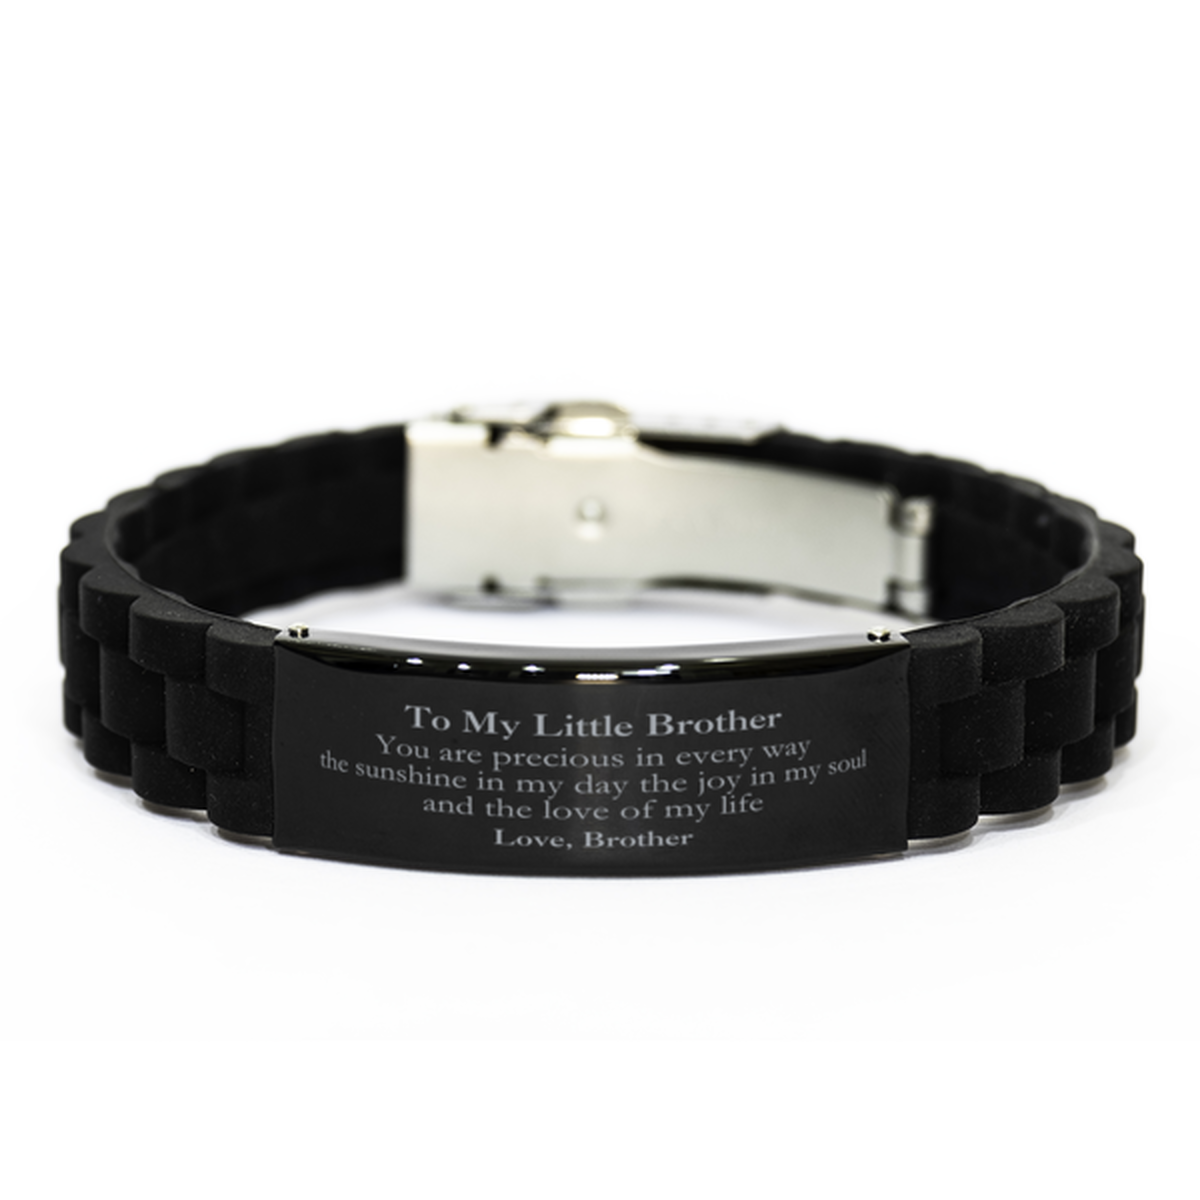 Graduation Gifts for Little Brother Black Glidelock Clasp Bracelet Present from Brother, Christmas Little Brother Birthday Gifts Little Brother You are precious in every way the sunshine in my day. Love, Brother